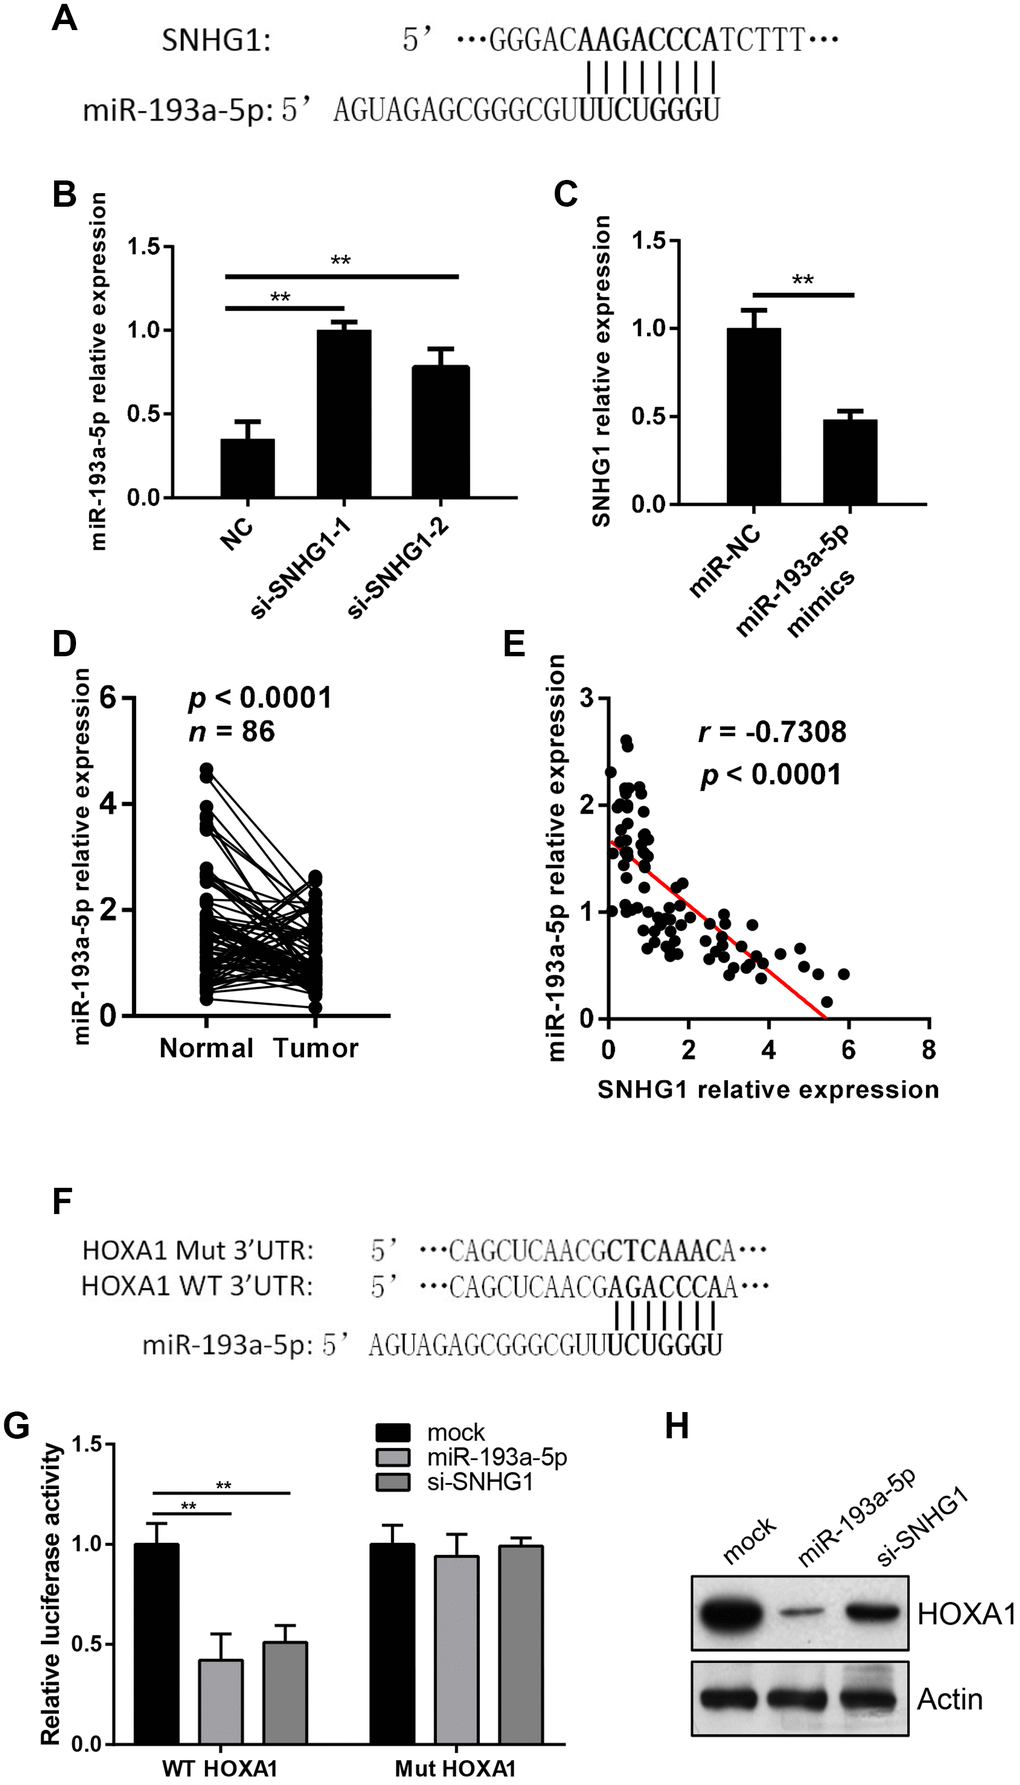 SNHG1 acts as a sponge of miR-193a-5p to activate HOXA1 expression. (A) Predicated binding sites of miR-193a-5p on SNHG1 gene. (B) Q-RT-PCR analysis of miR-193a-5p levels in MDA-MB-231 cells transfected with NC, si-SNHG1-1 and si-SNHG1-2 siRNAs. **pC) Q-RT-PCR analysis of SNHG1 levels in MDA-MB-231 cells transfected with miR-NC and miR-193a-5p mimics. **pD) Q-RT-PCR analysis of miR-193a-5p levels in collected breast cancer tissues (Tumor) and adjacent normal tissues (Normal). n=86, pE) Correlation between miR-193a-5p levels and SNHG1 levels in breast cancer tissues. r=-0.7308, pF) Wild-type (WT) and mutated (Mut) binding sites of miR-193a-5p on HOXA1 3’UTR region. (G) Effects of miR-193a-5p and si-SNHG1 on wild-type and mutant HOXA1 3’UTR reporter gene vectors in MDA-MB-231 cells. **pH) Western blot assay of HOXA1 in MDA-MB-231 cells transfected with miR-193a-5p mimcs or si-SNHG1. Actin was used as loading control.